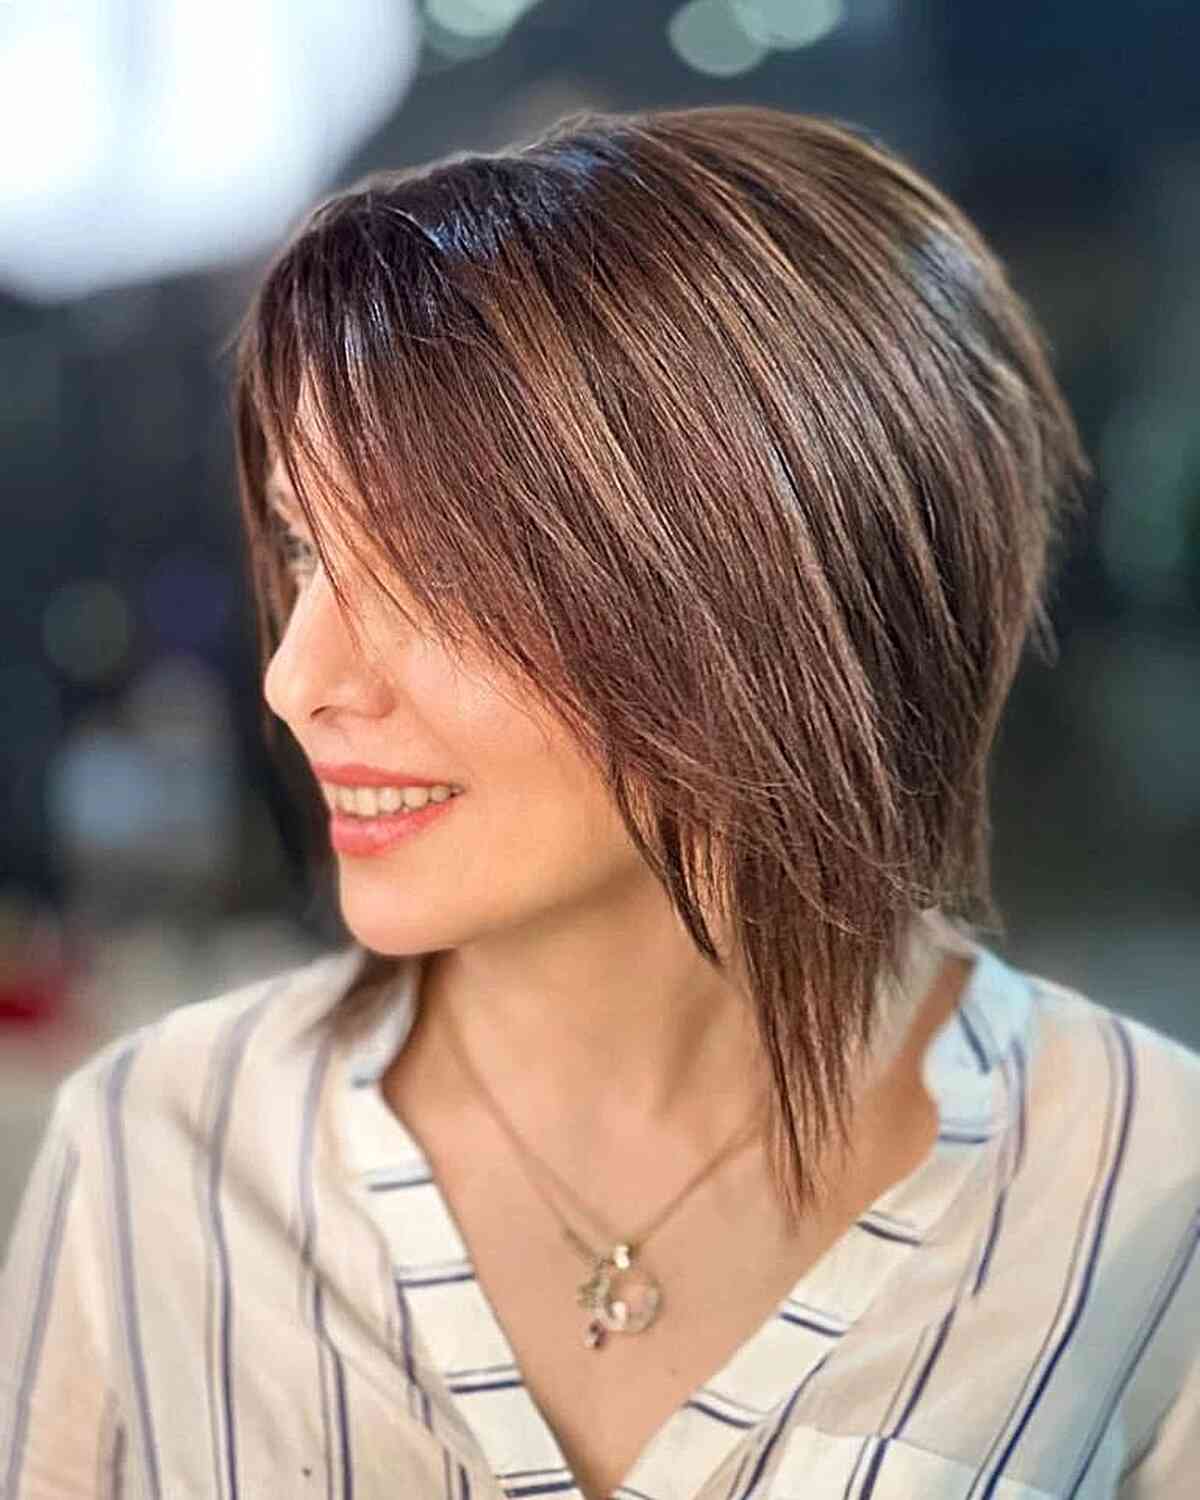 Choppy Long Wixie Cut for women with short hair and a brown balayage